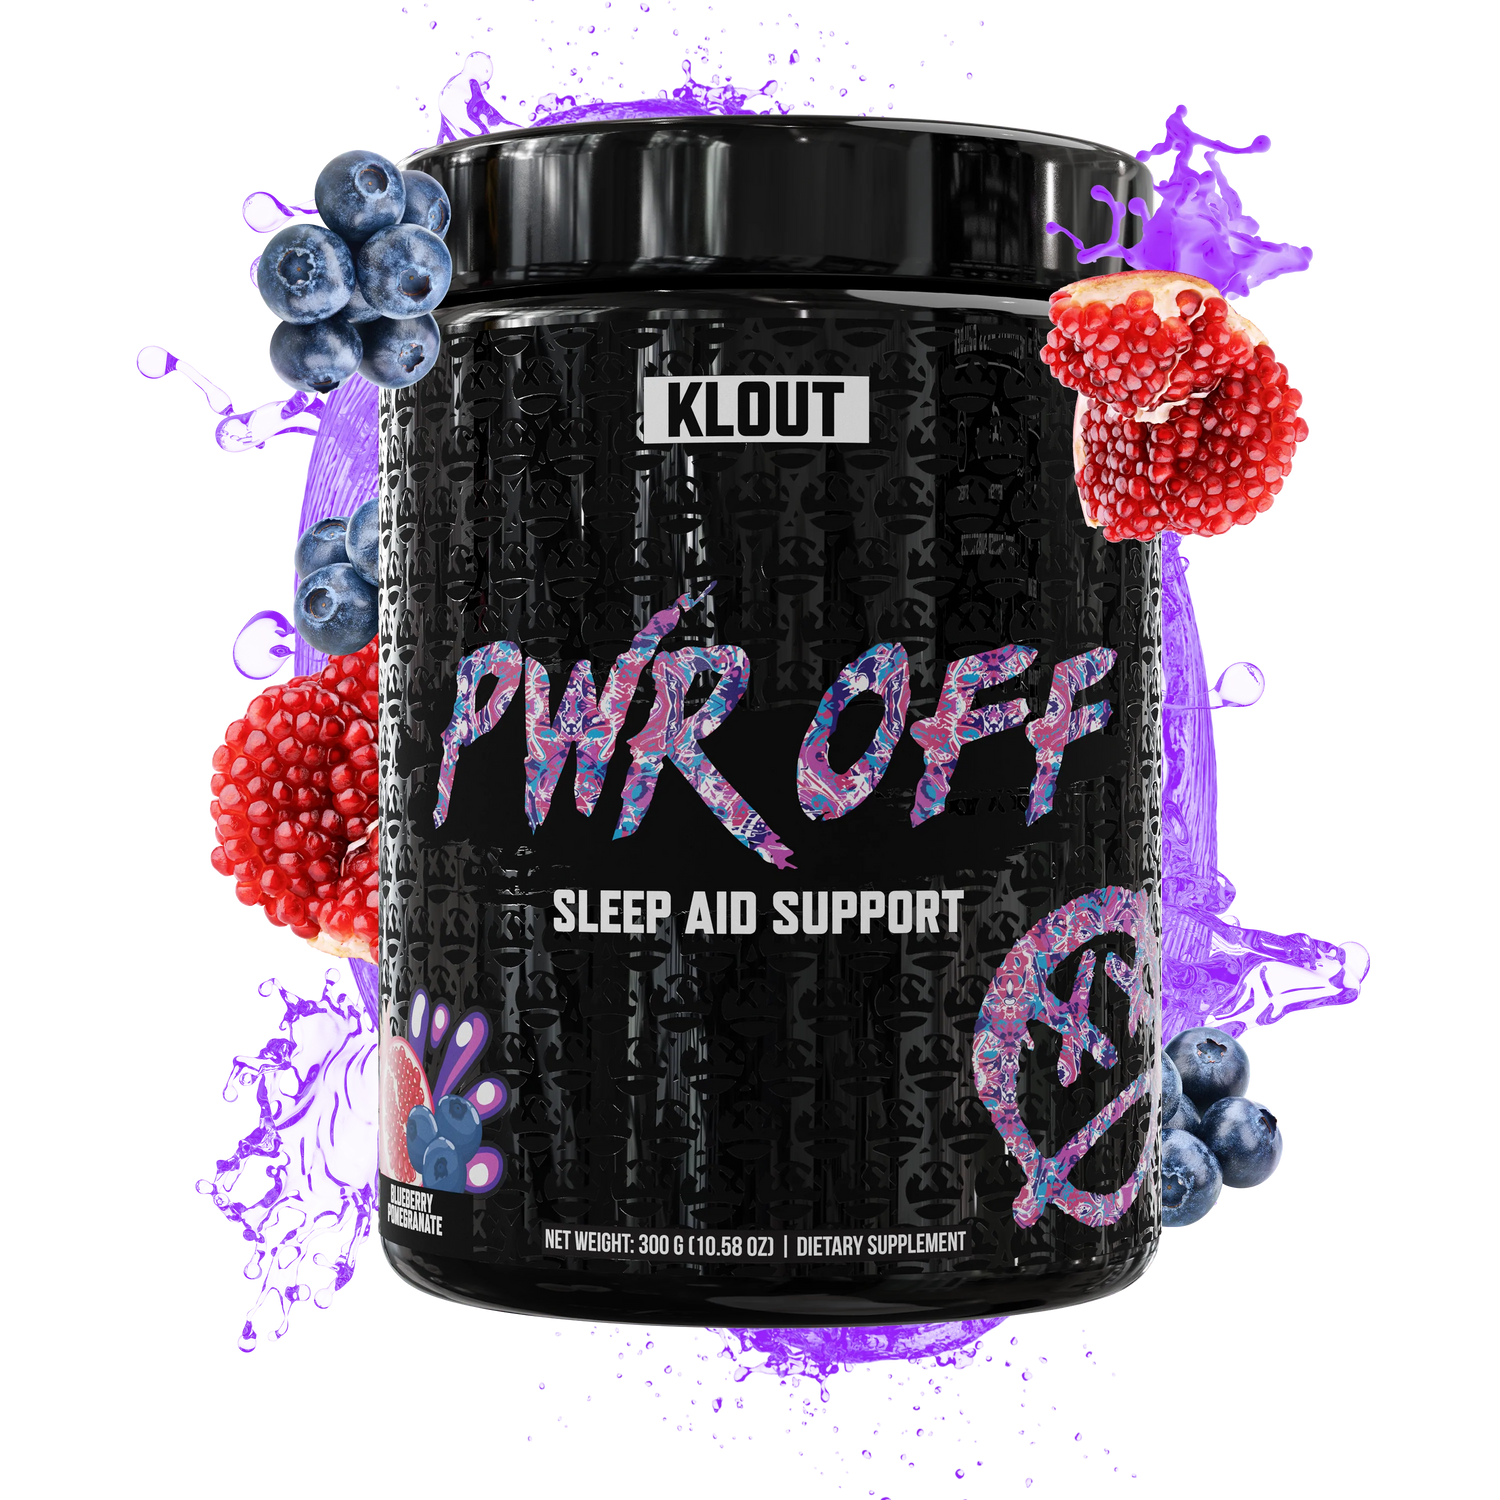 PWR OFF- Sleep Aid Support KLOUT